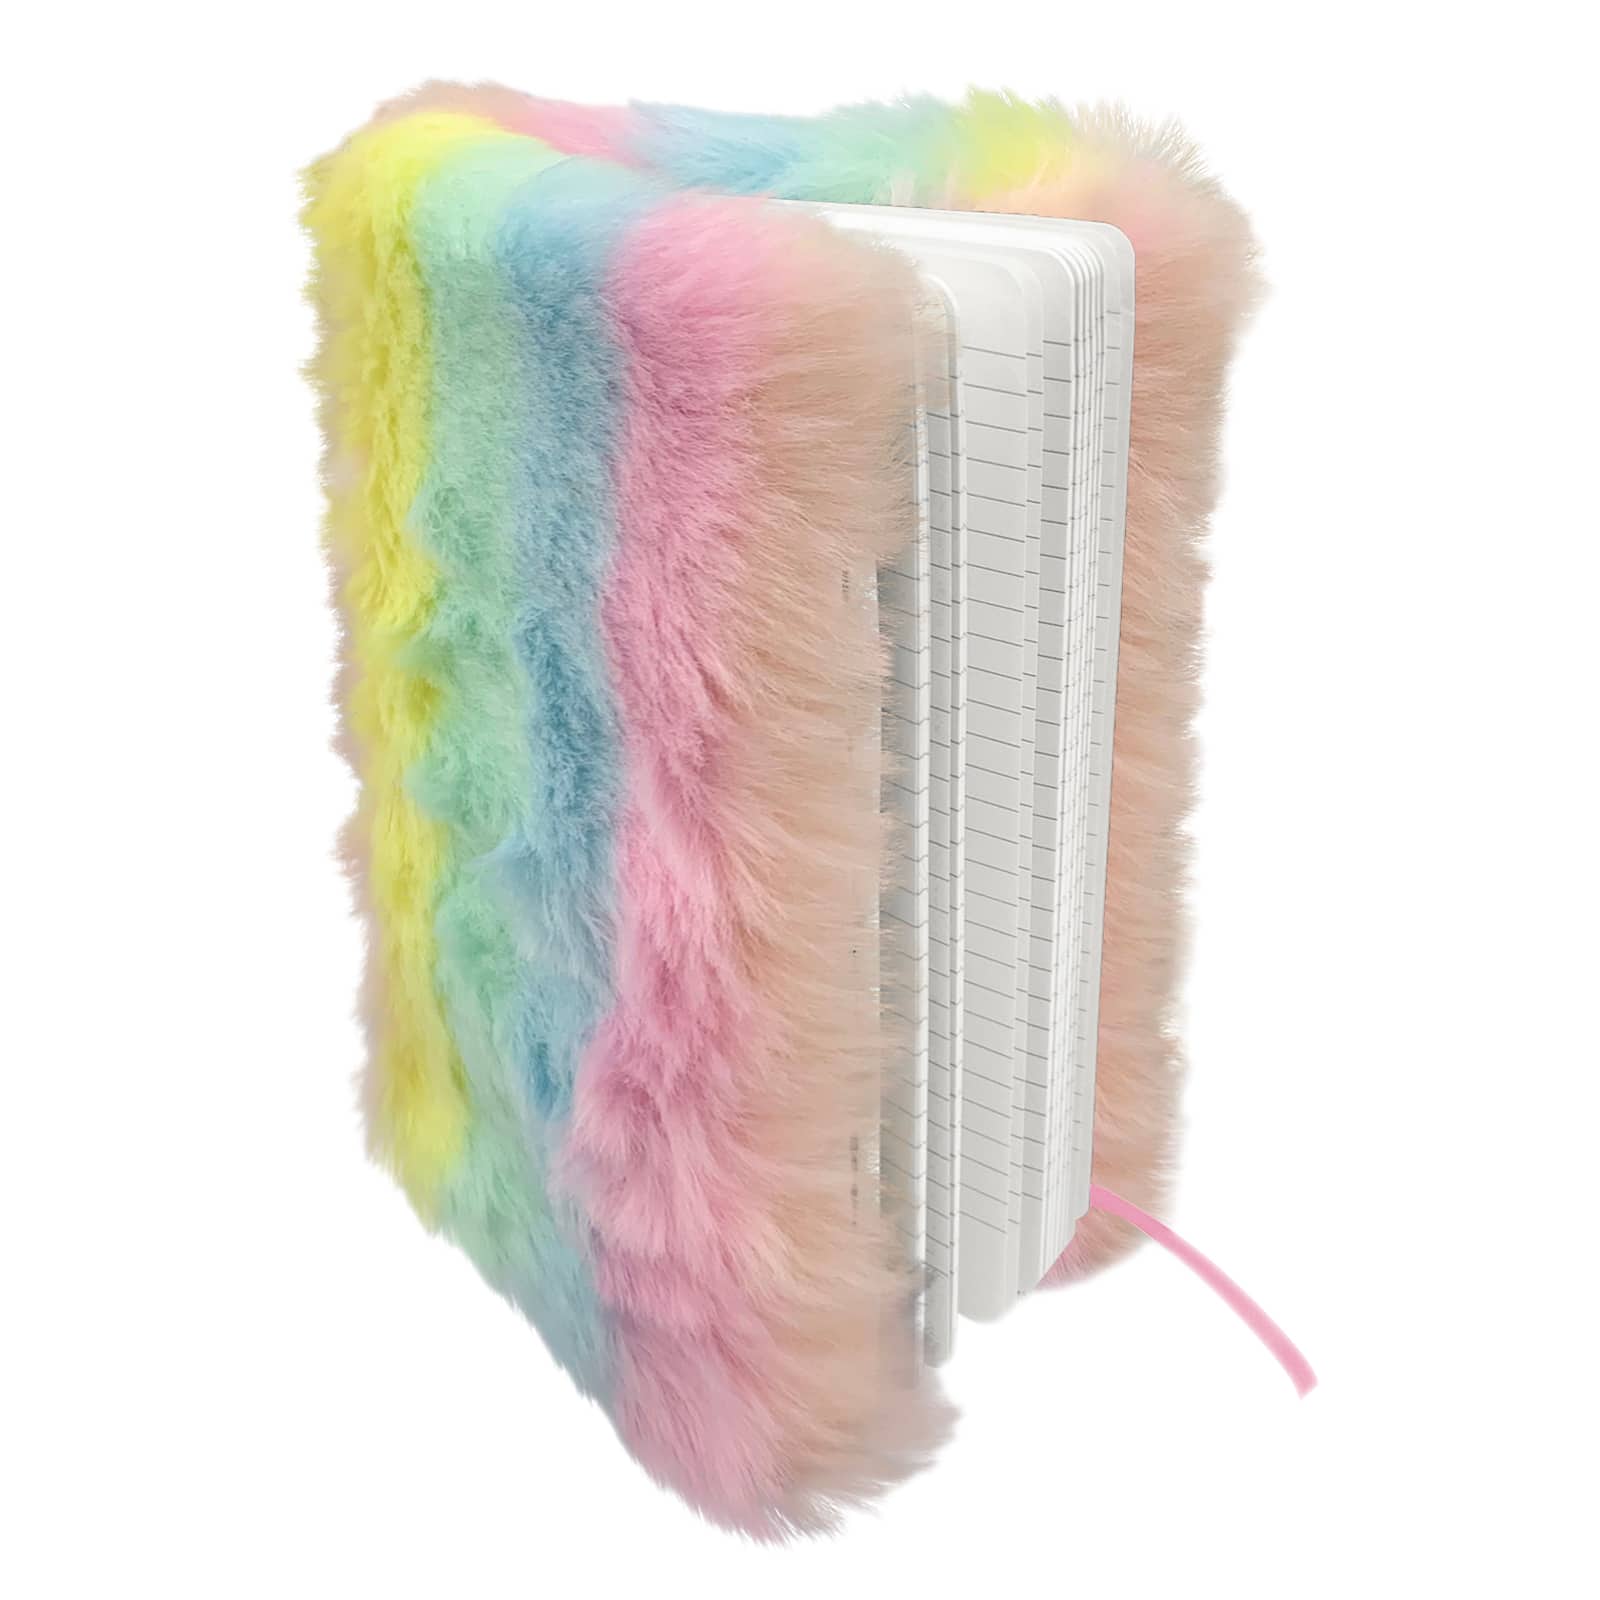 12 Pack: Pastel Craft Faux Fur by Creatology&#x2122;